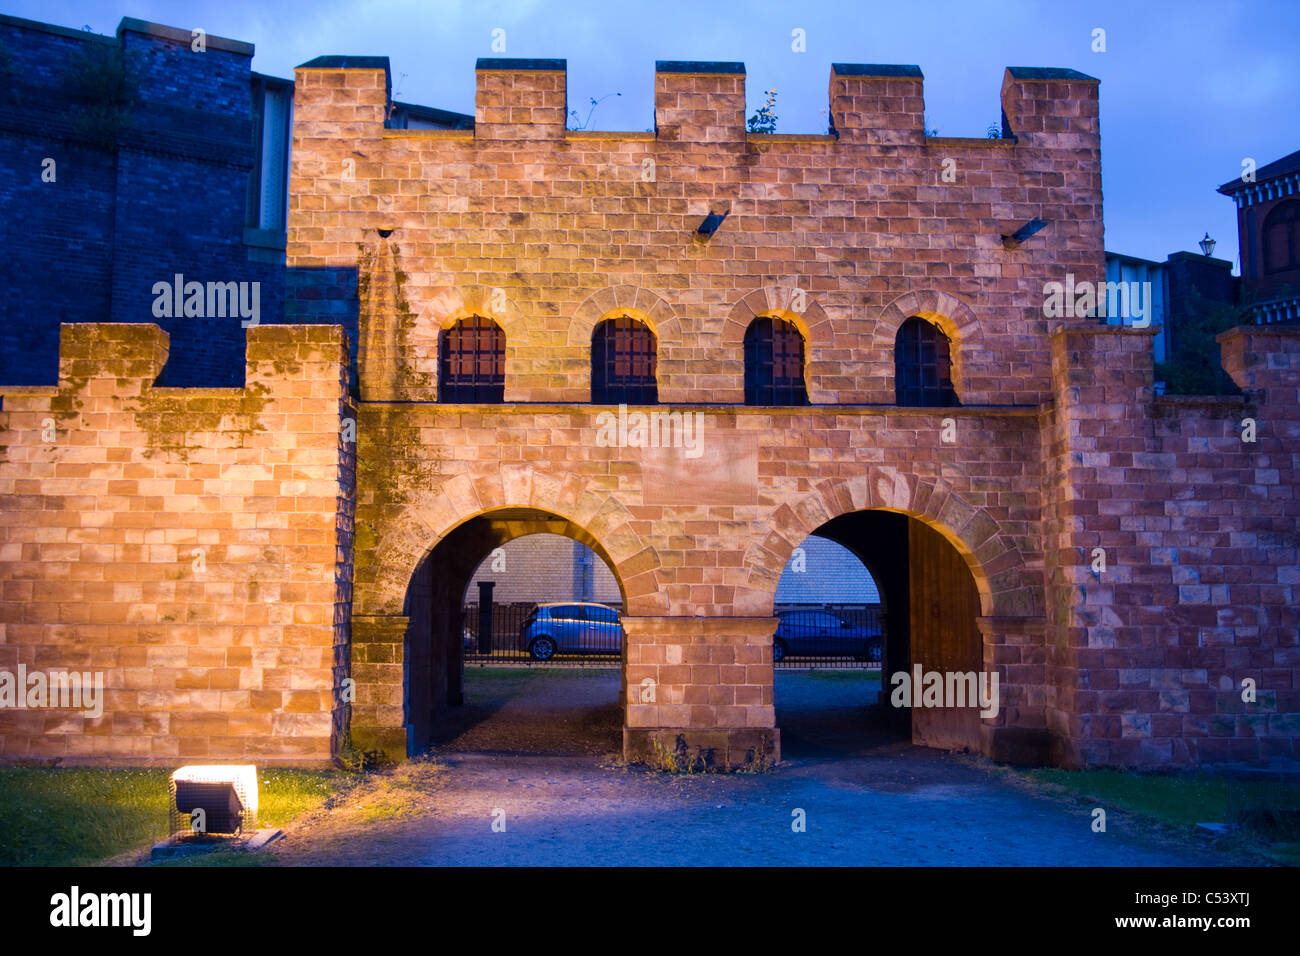 Roman Wall at Night Castlefield, Manchester Stock Photo